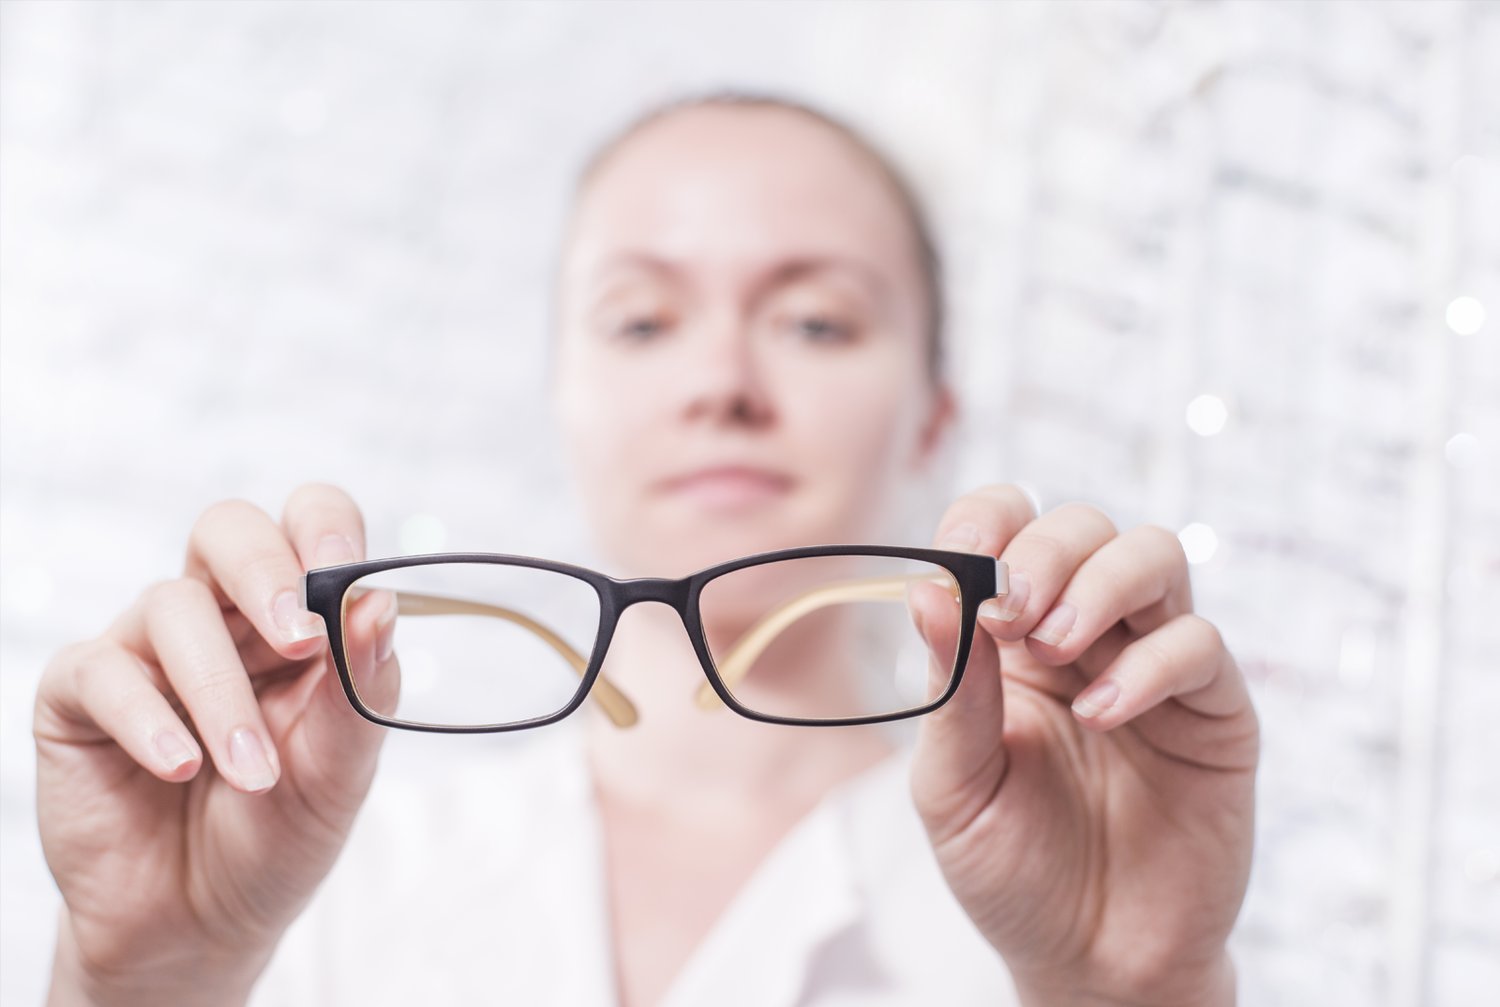 Tips on eyewear care and cleaning for spec wearers